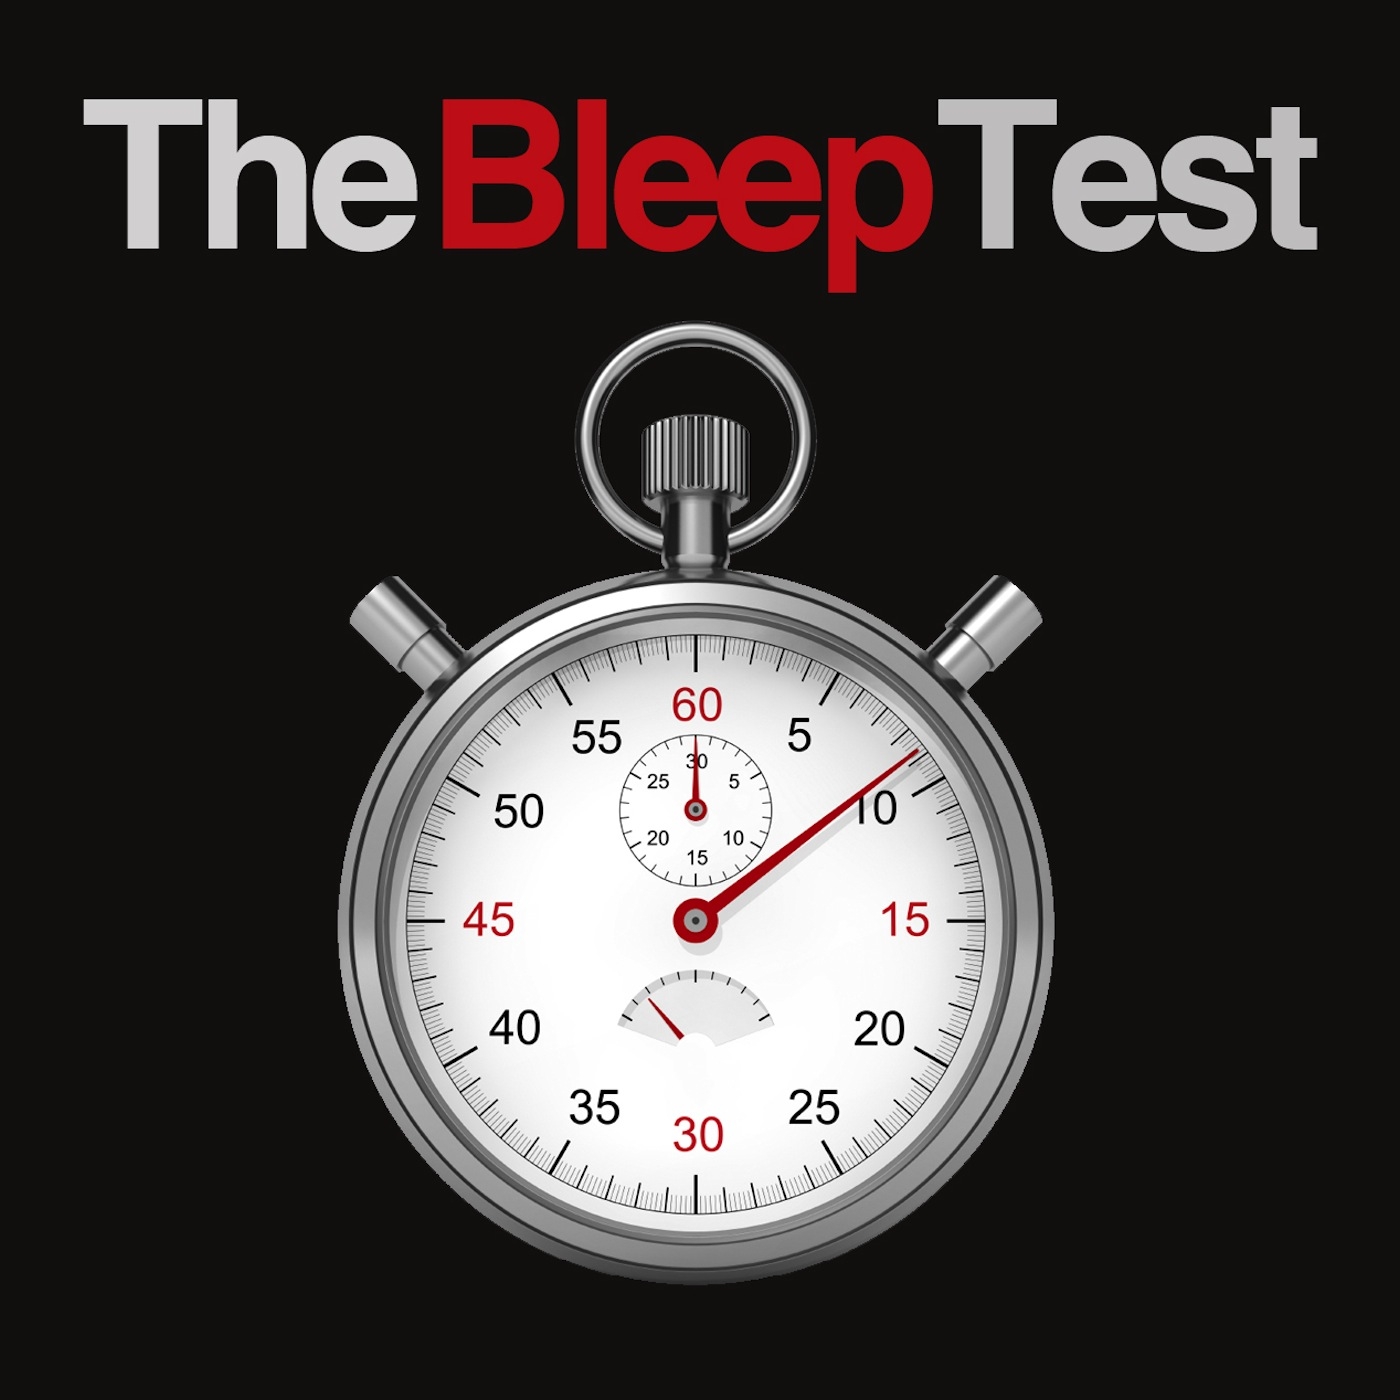 The Bleep Test: Instructions for the 20m Test